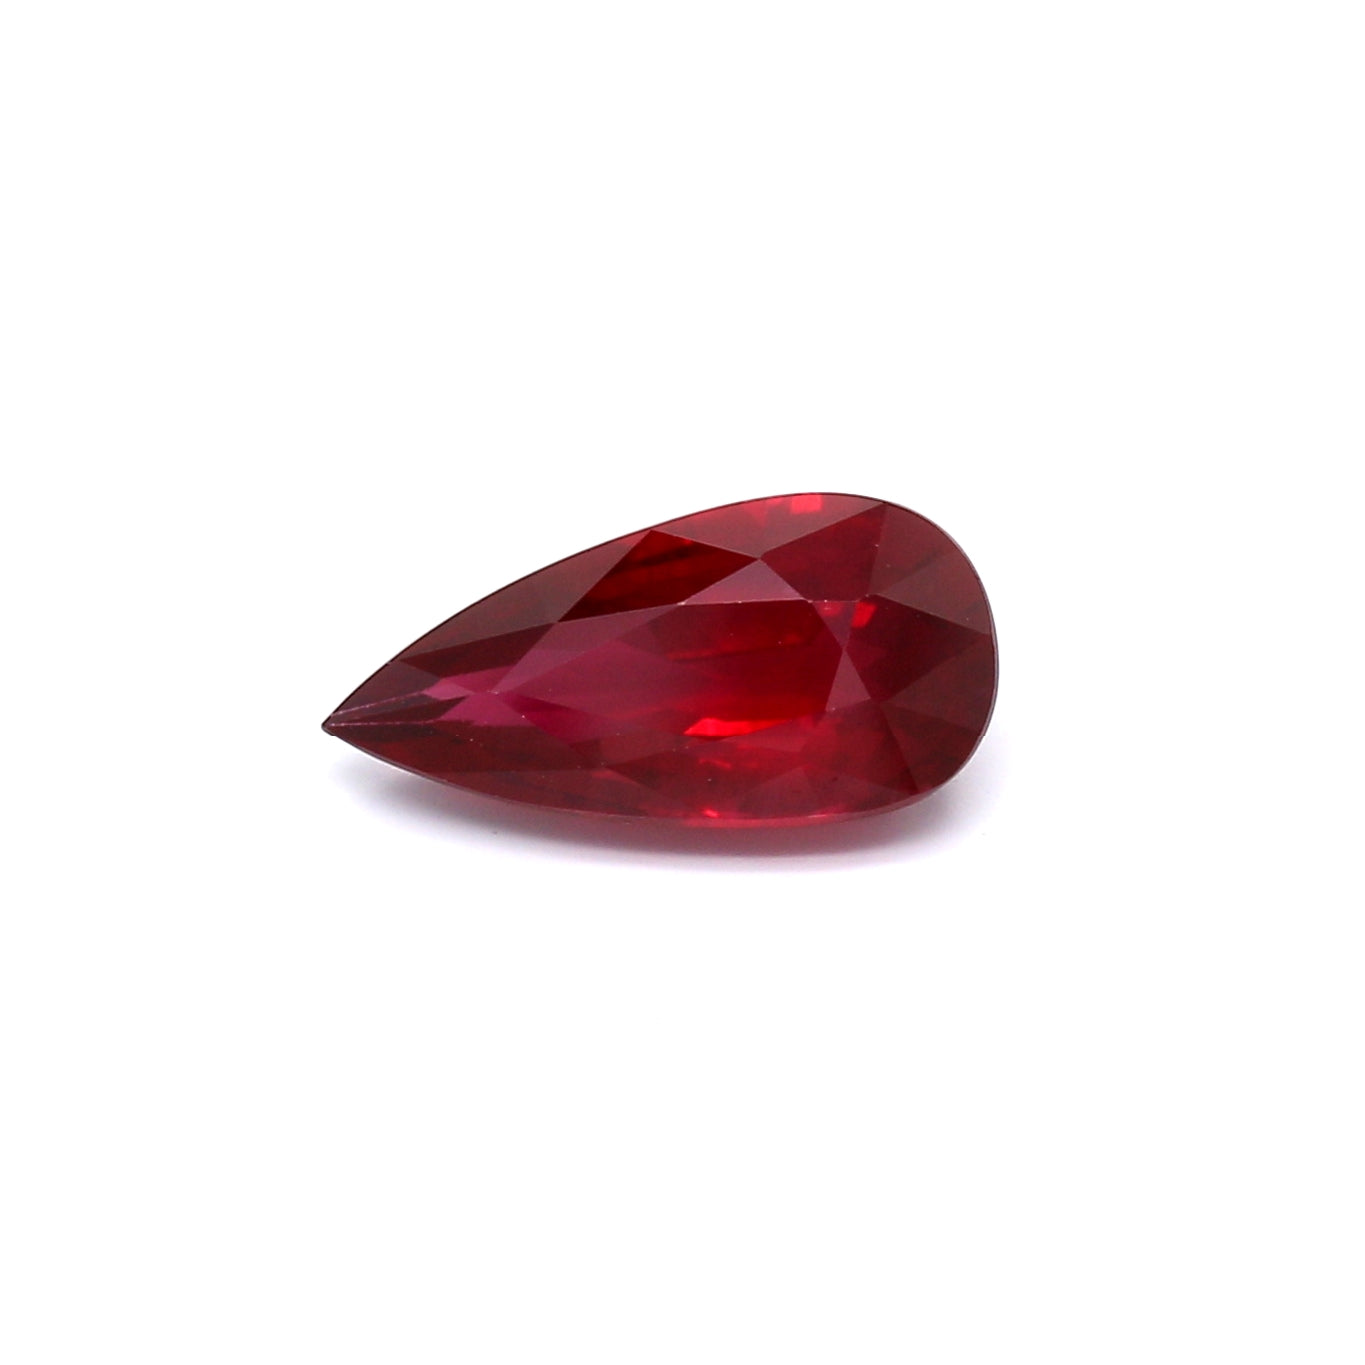 2.22ct Pear Shape Ruby, Heated, Mozambique - 11.86 x 5.82 x 4.09mm